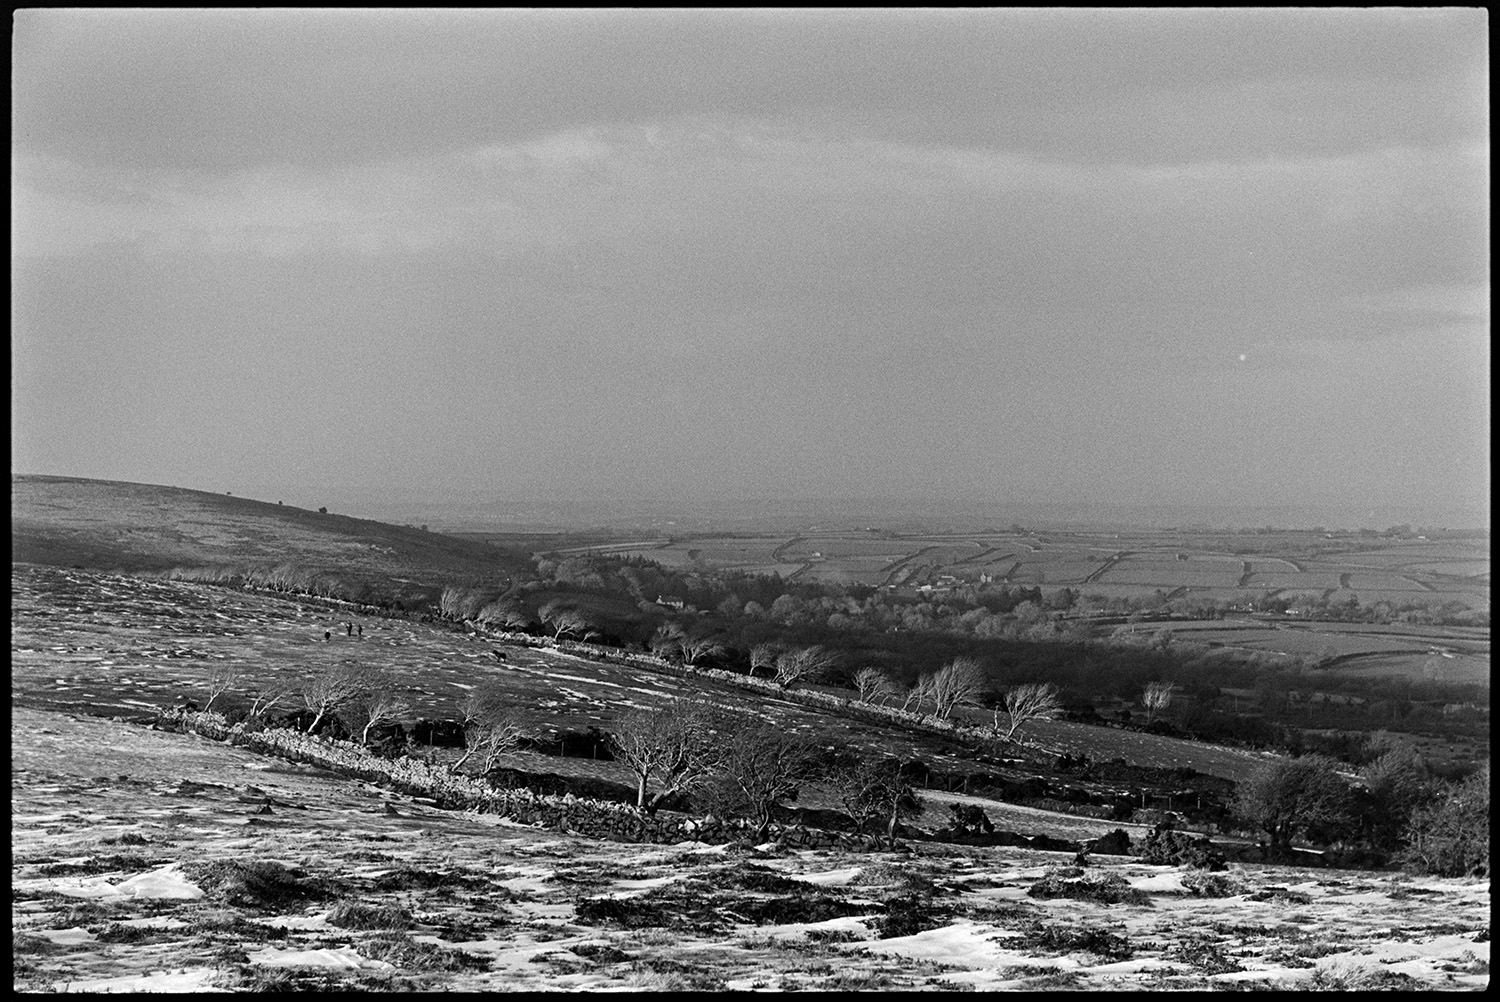 Snow, moorland view with stone wall. 
[Sow covered moorland near Gidleigh on Dartmoor. Dry stone walls and trees are visible with a landscape of Fields and hedgerows in the background.]